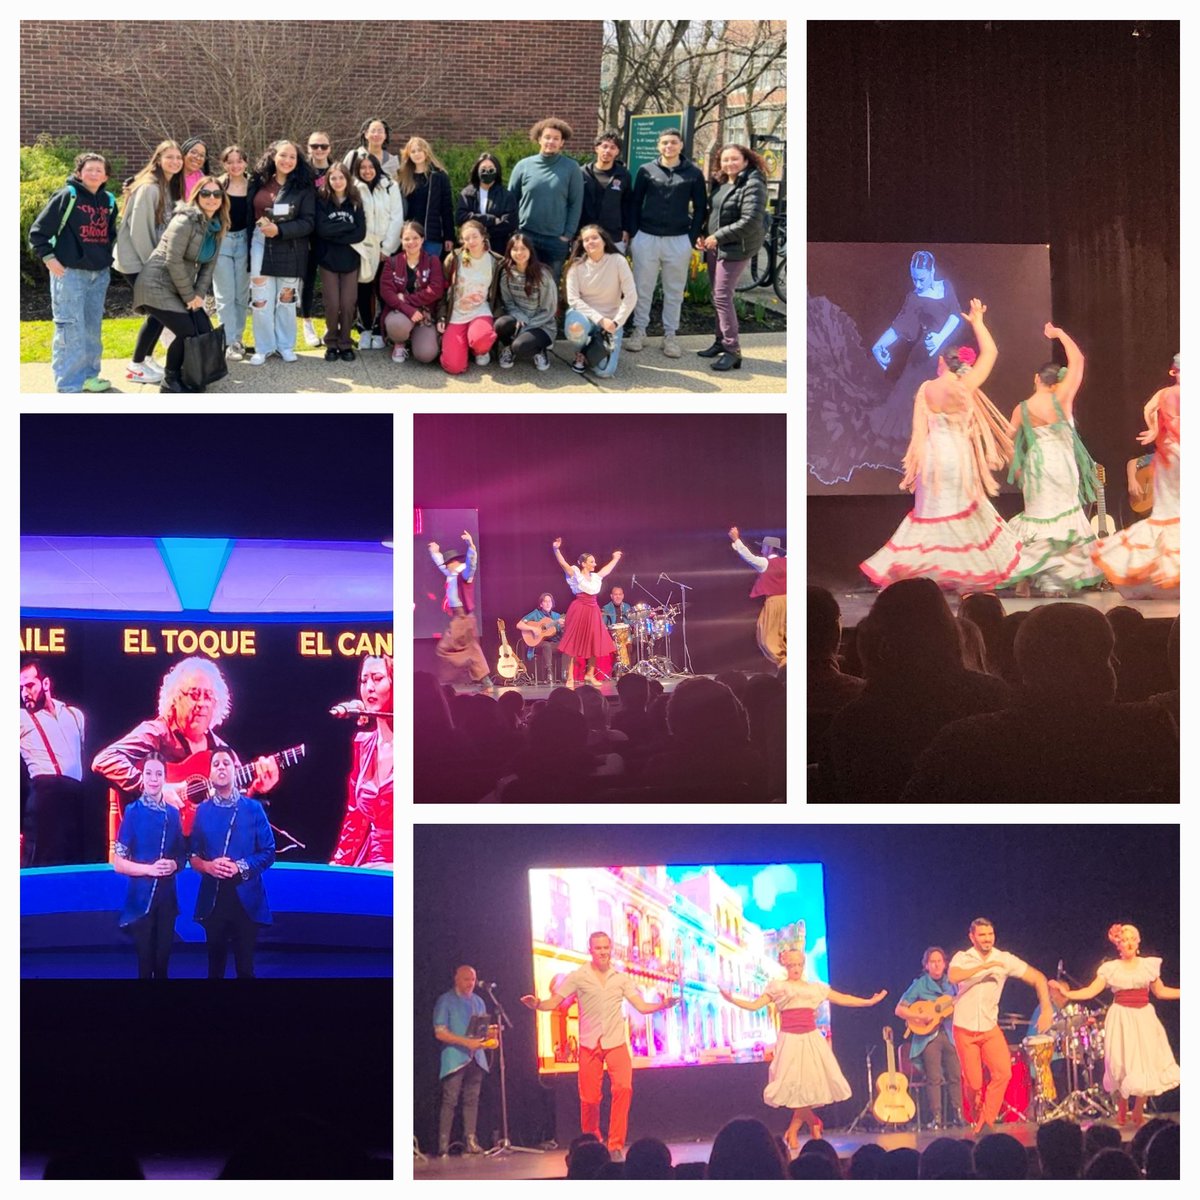 One of a kind! #SpanishCultureShows
#theater #livePerformances #fun
@BectonHS Sts had a lot of fun!!! @PaolaBonanno3